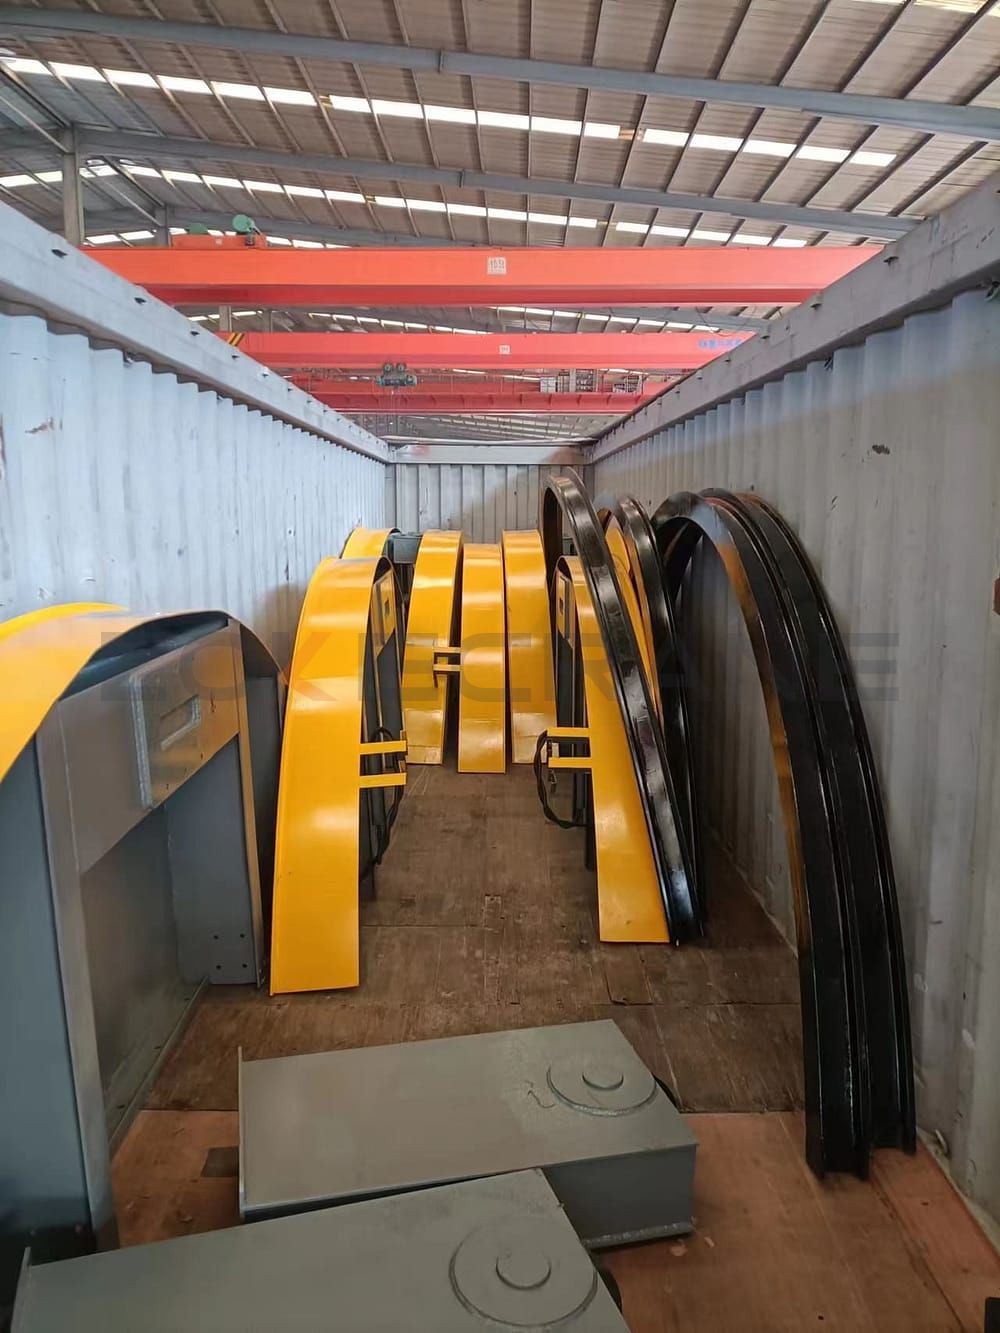 transfer carts exported to Indonesia